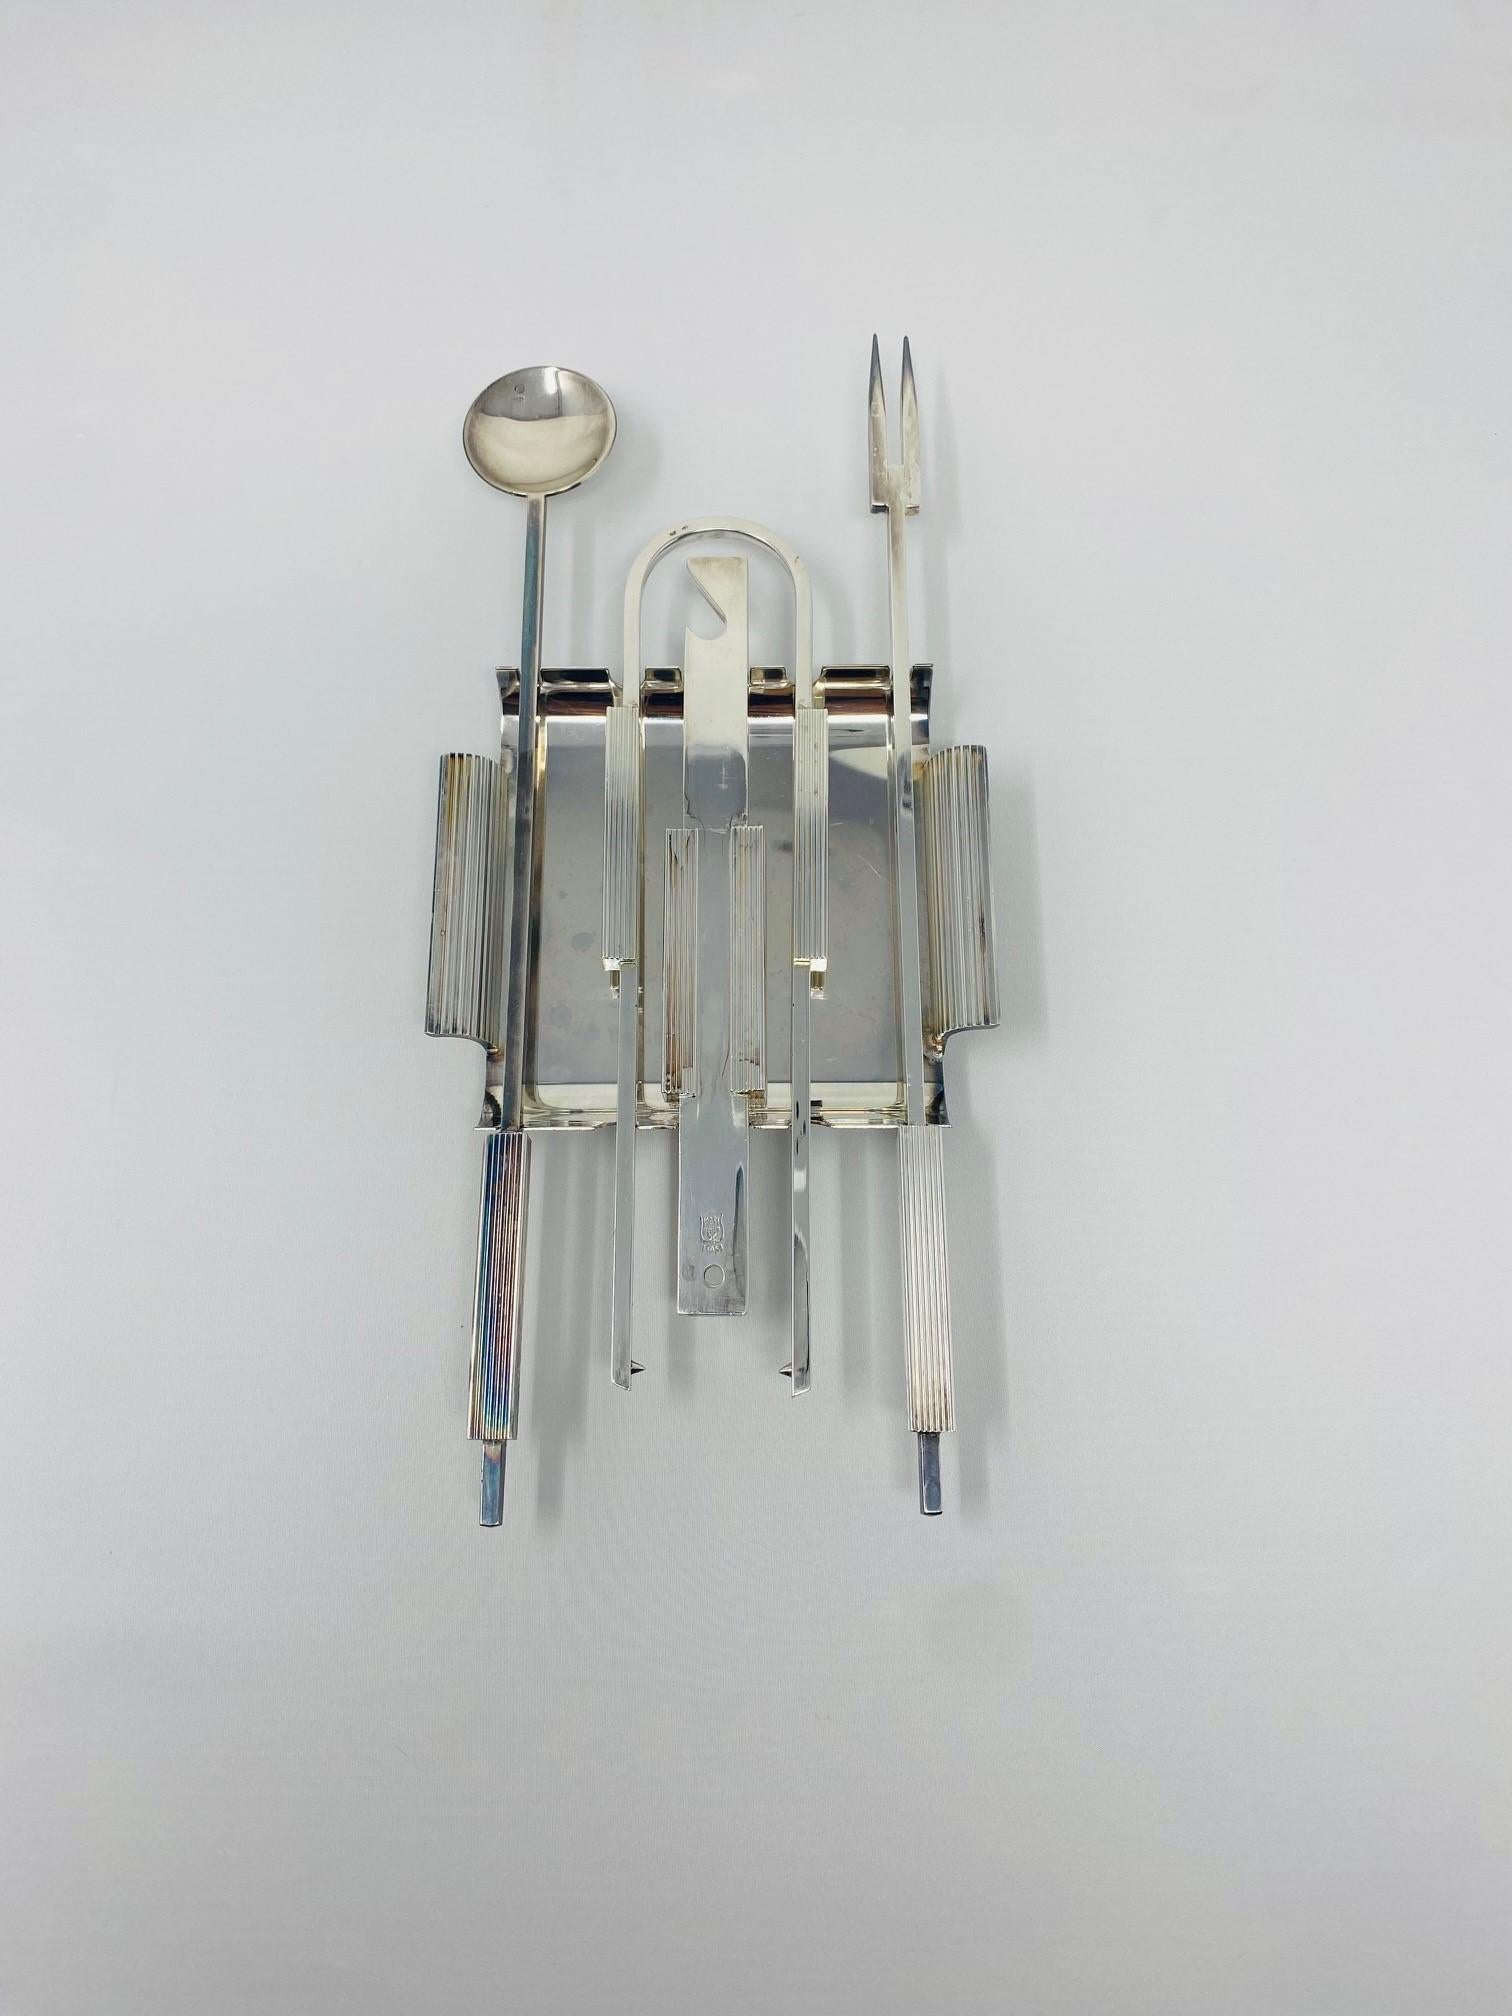 Very unique and rare Gio Ponti style bar tool set. This wonderful original bar utensils set in silverplate is simply breath taking in design. The set includes bottle opener, mixing spoon, ice tong and long cocktail fork. The sleek and classic